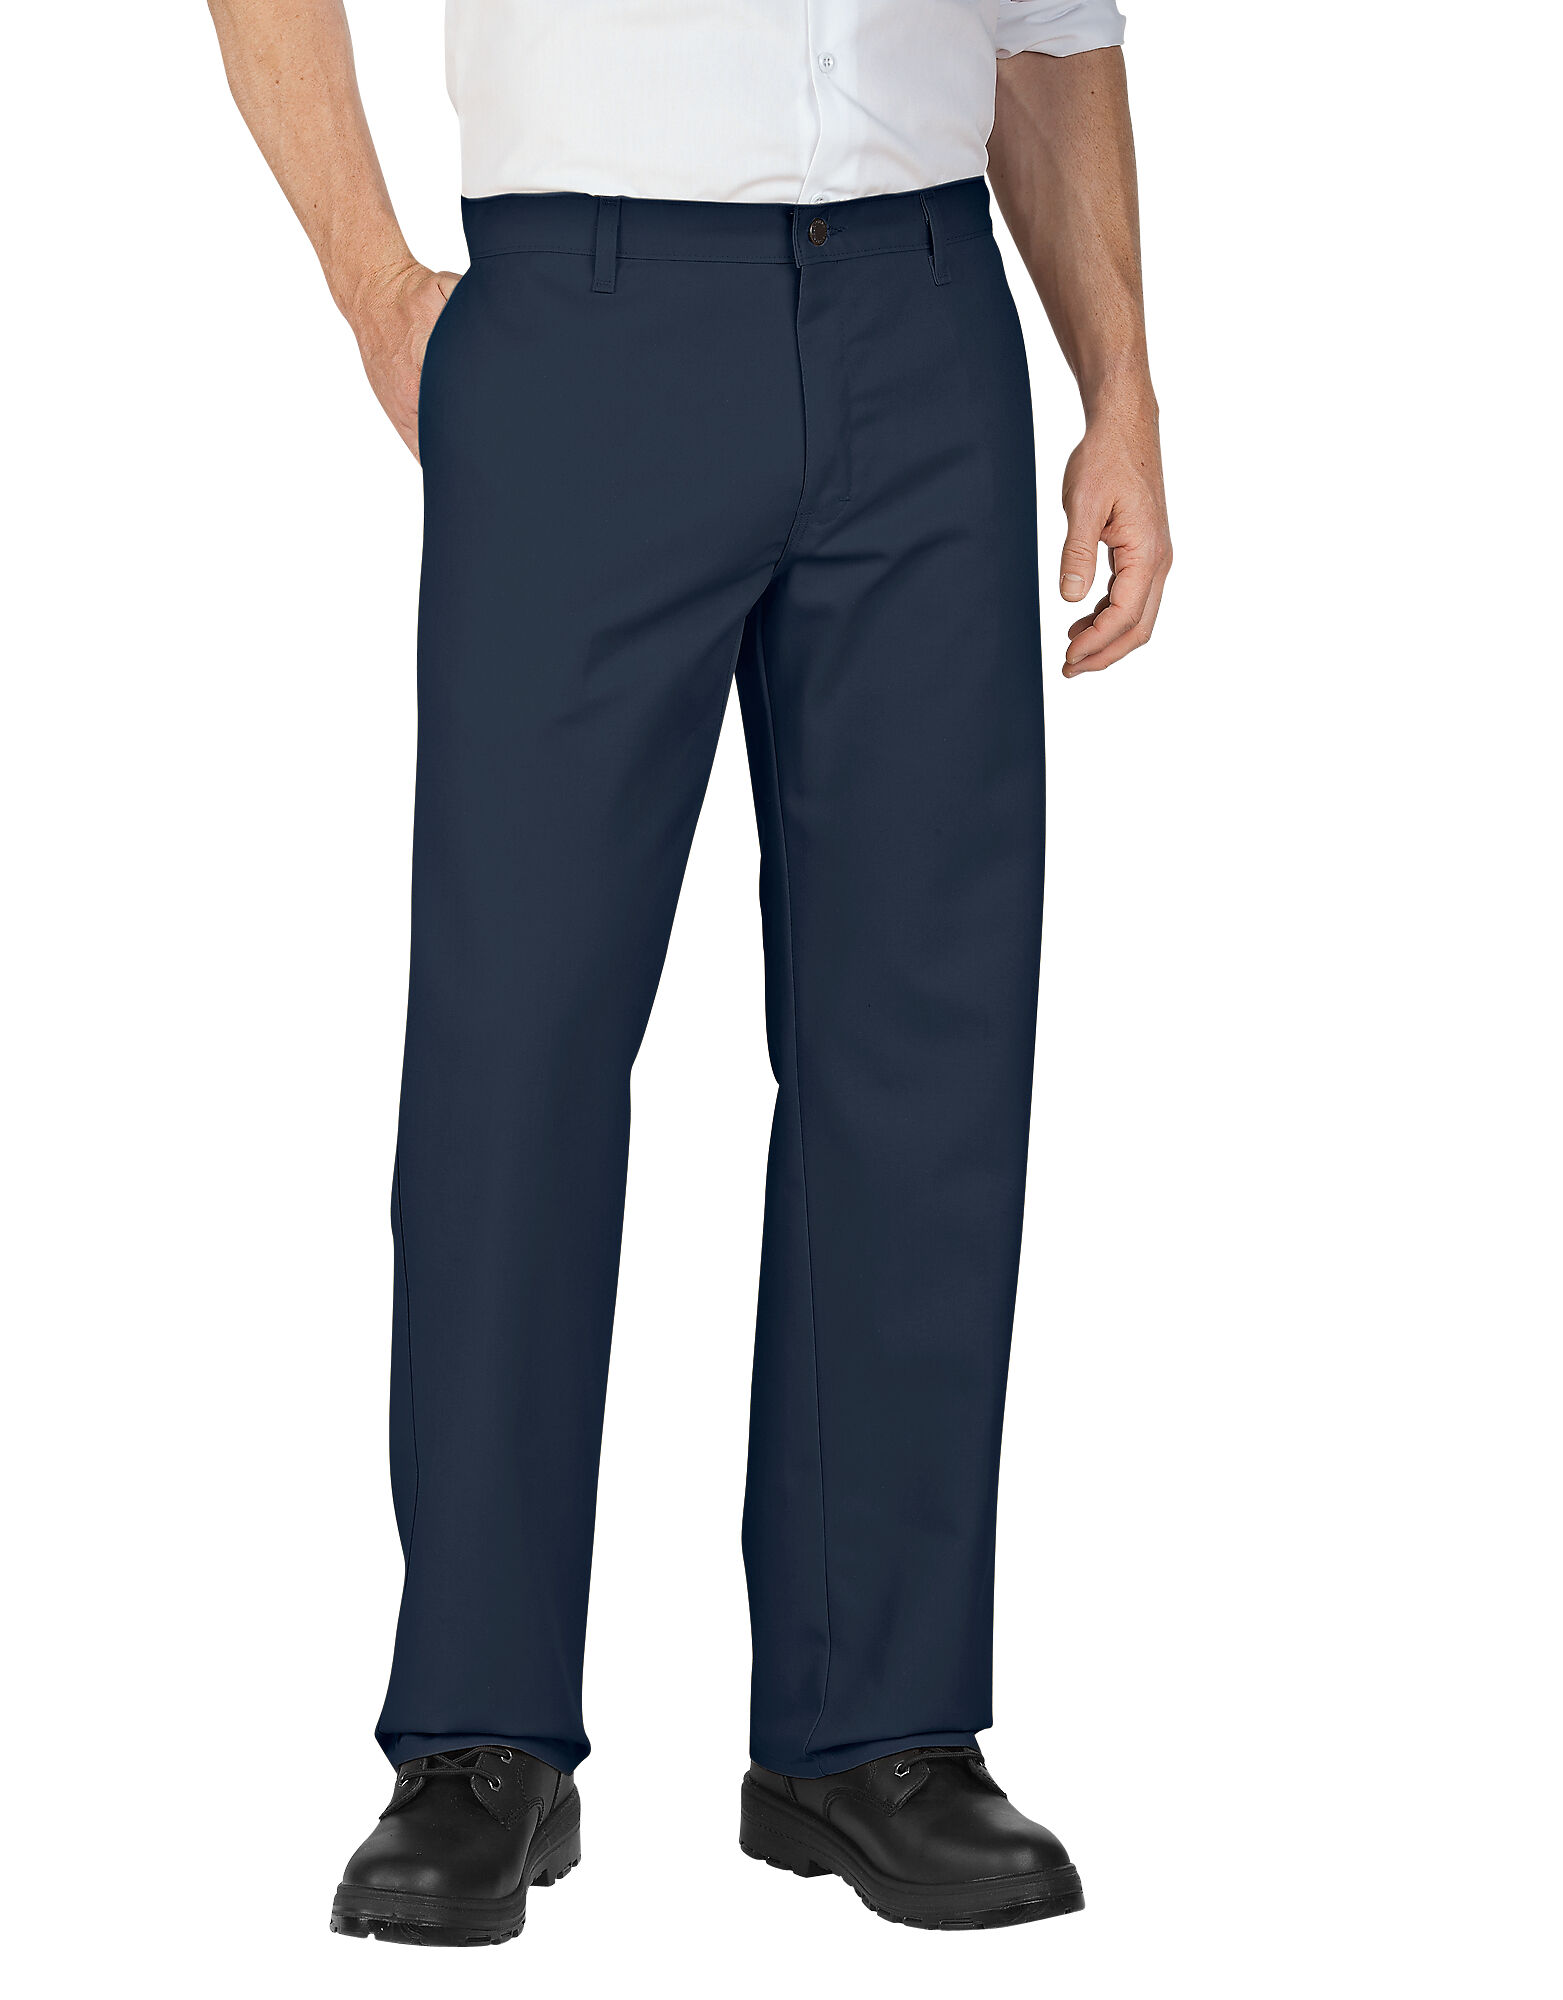 Genuine Dickies Mens Relaxed Fit Straight Leg Flat Front Flex Pant | eBay